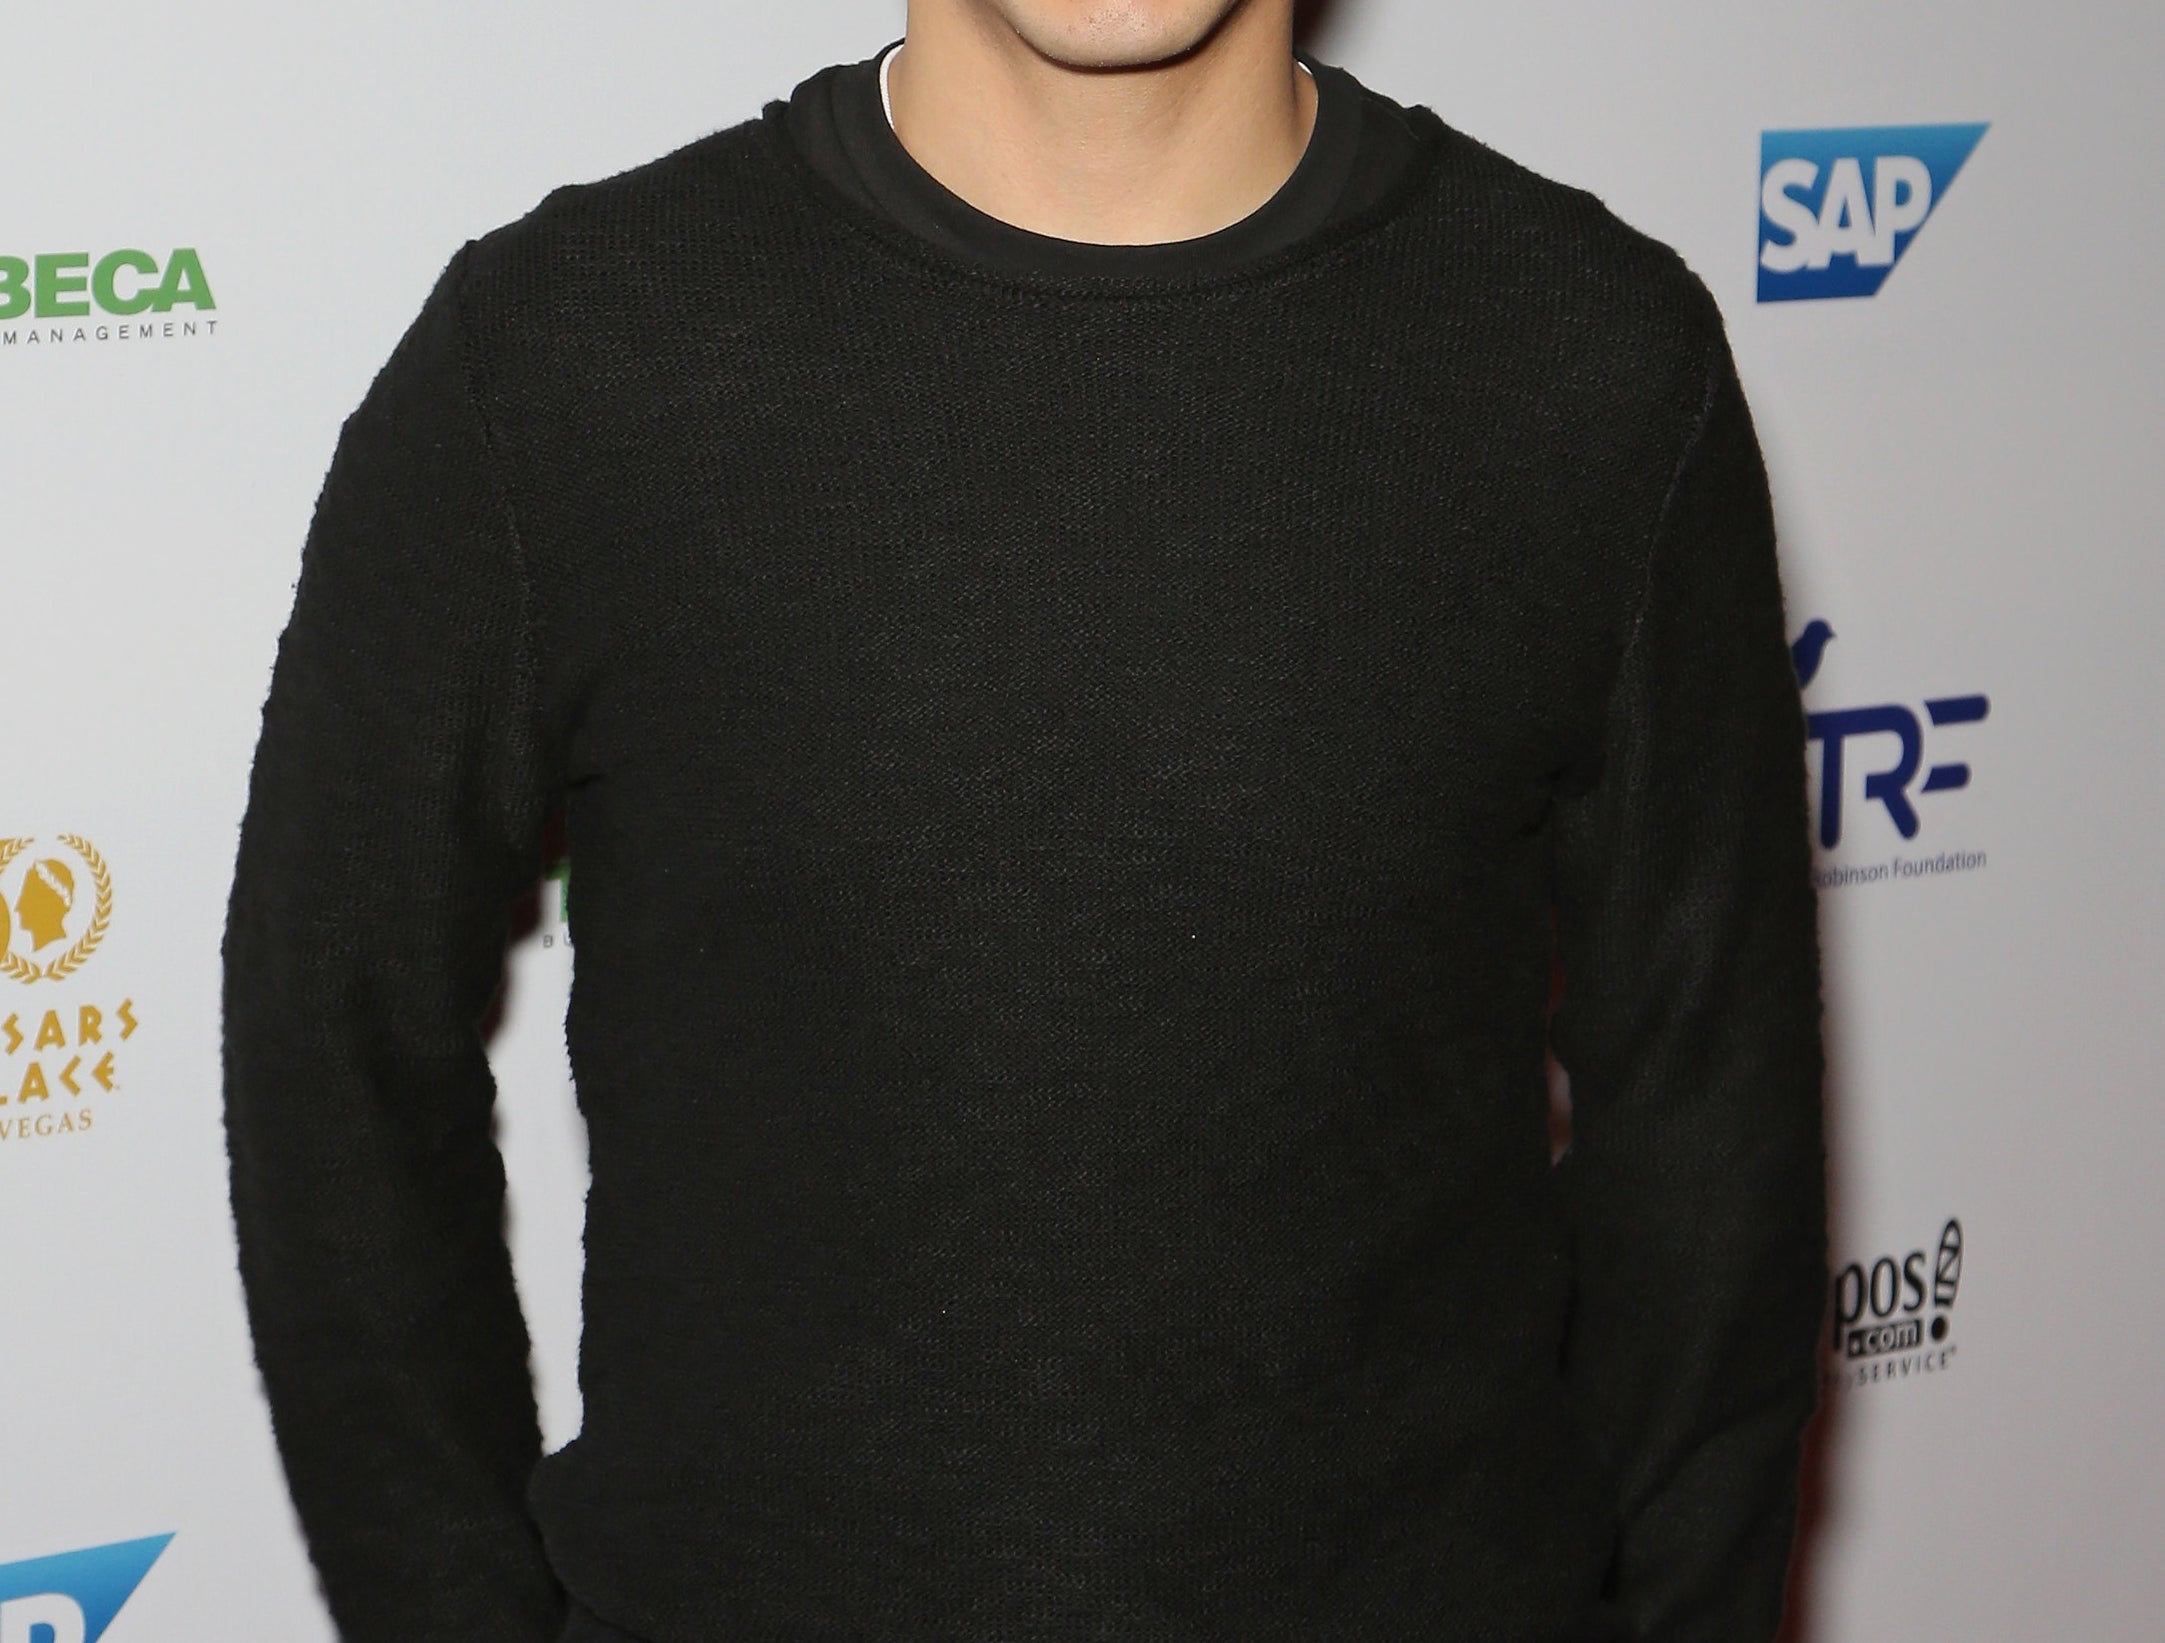 David smiles and wears a plain black long sleeve shirt at an event